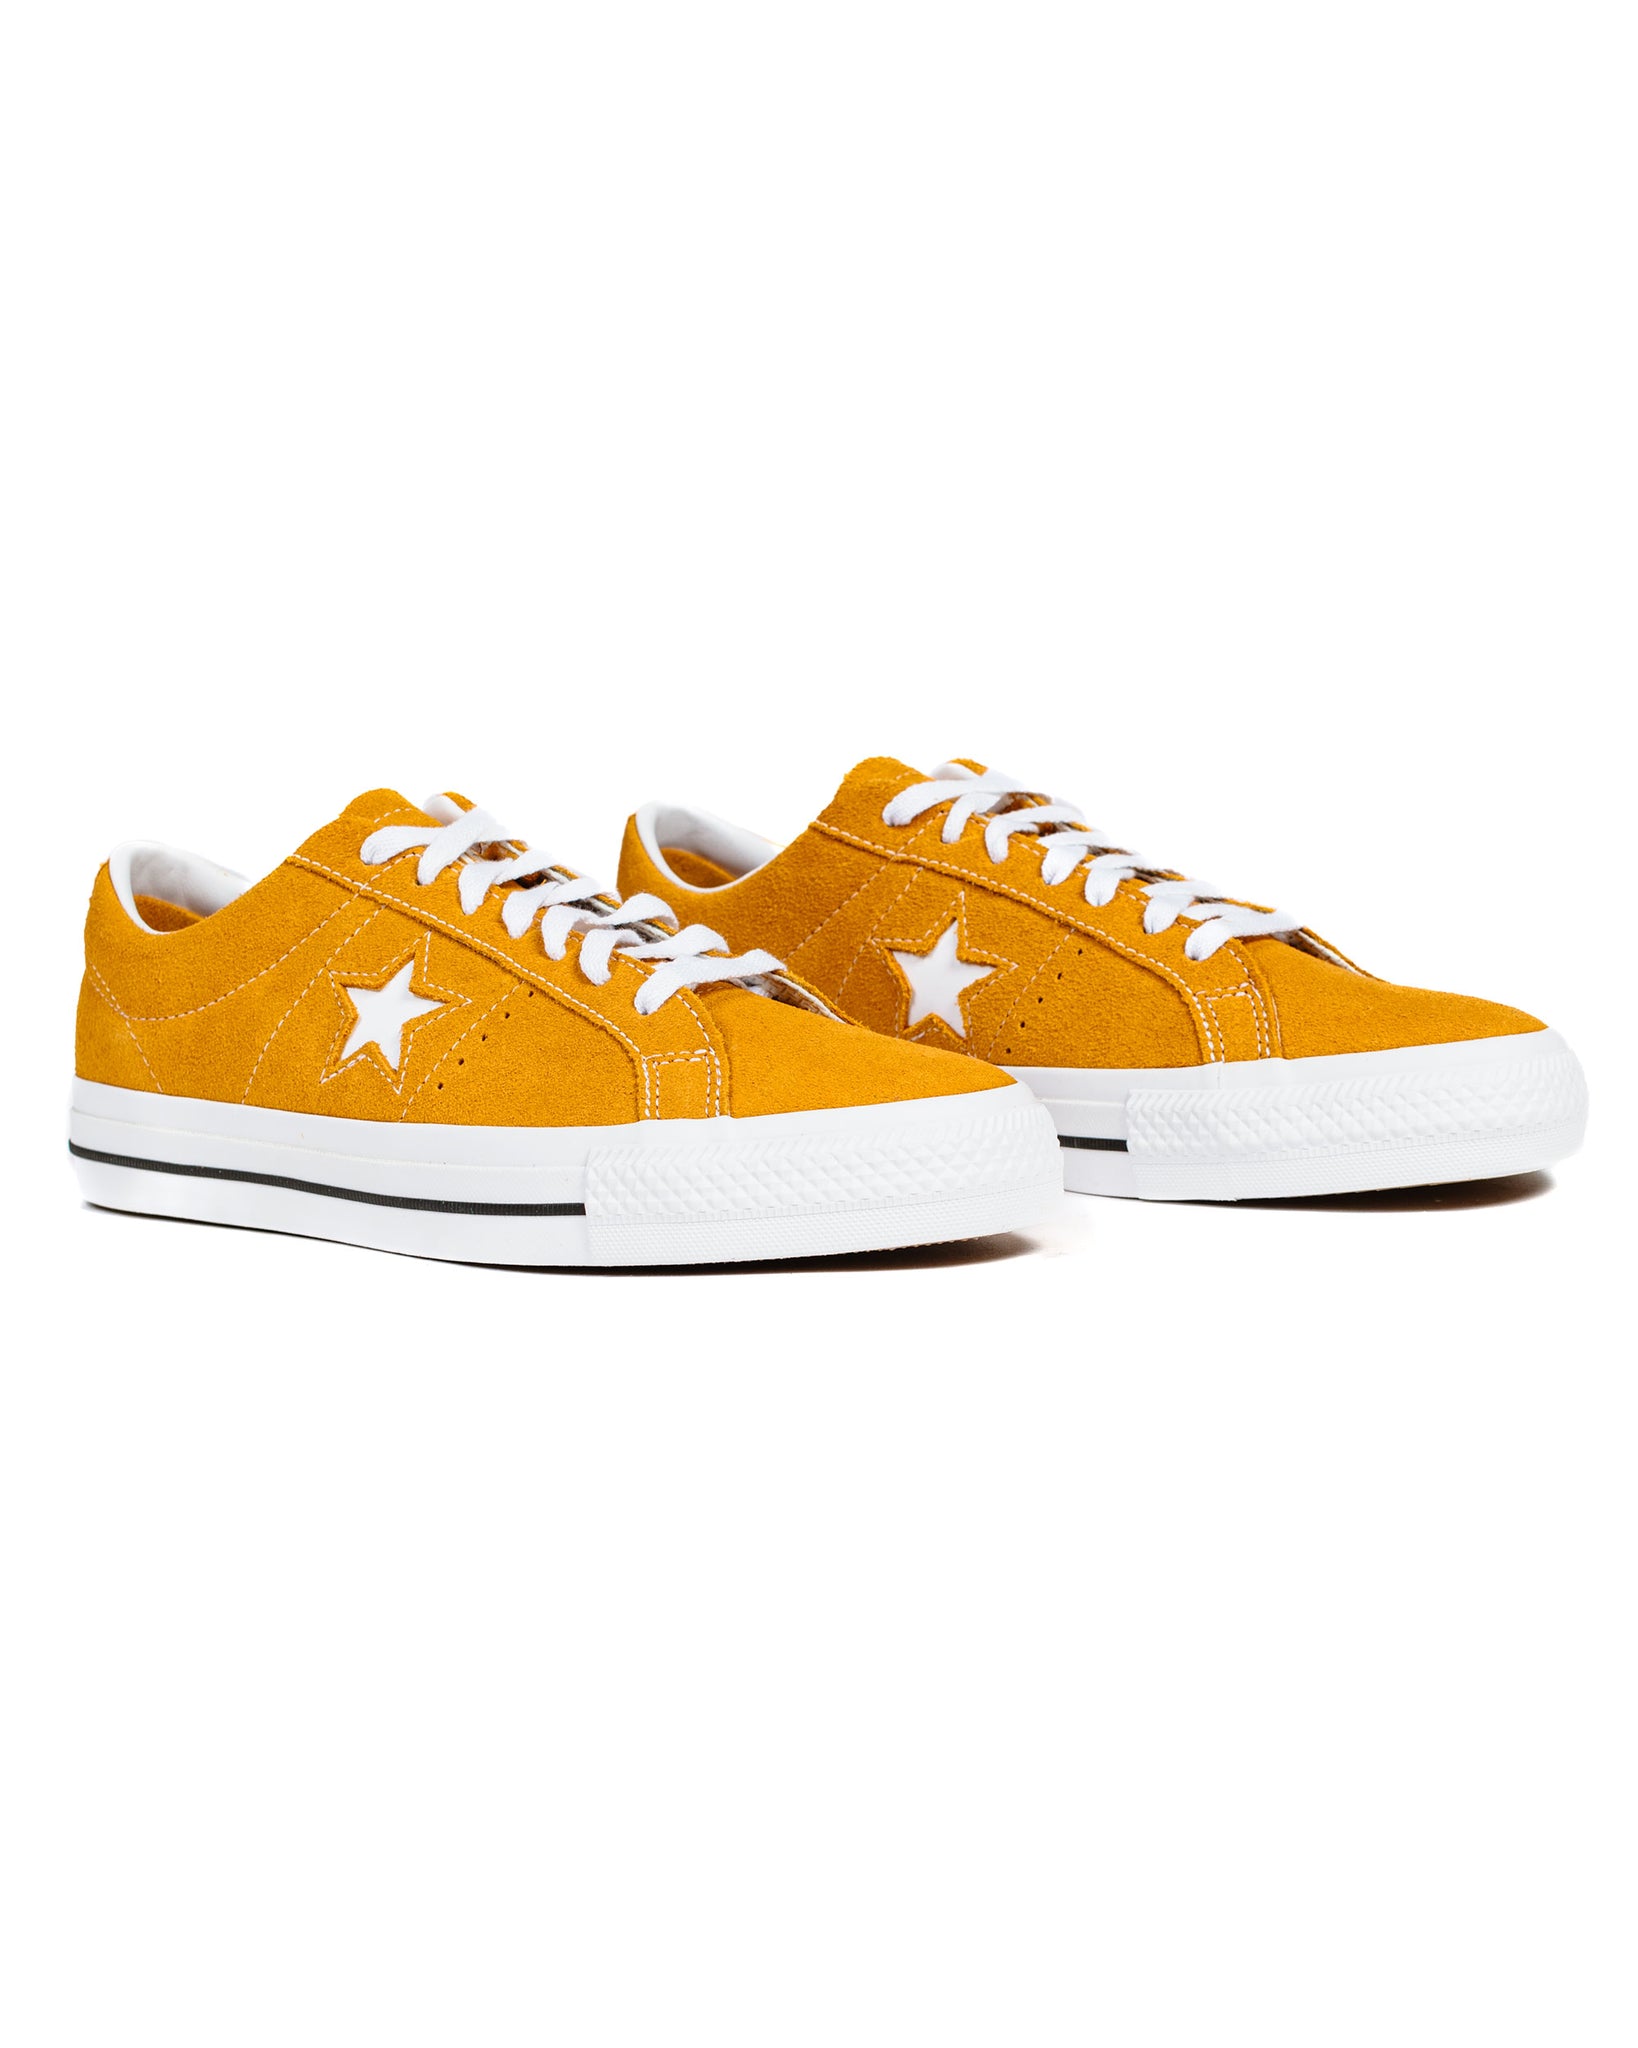 Converse One Star Pro Ox Golden Sundial A02944C Side